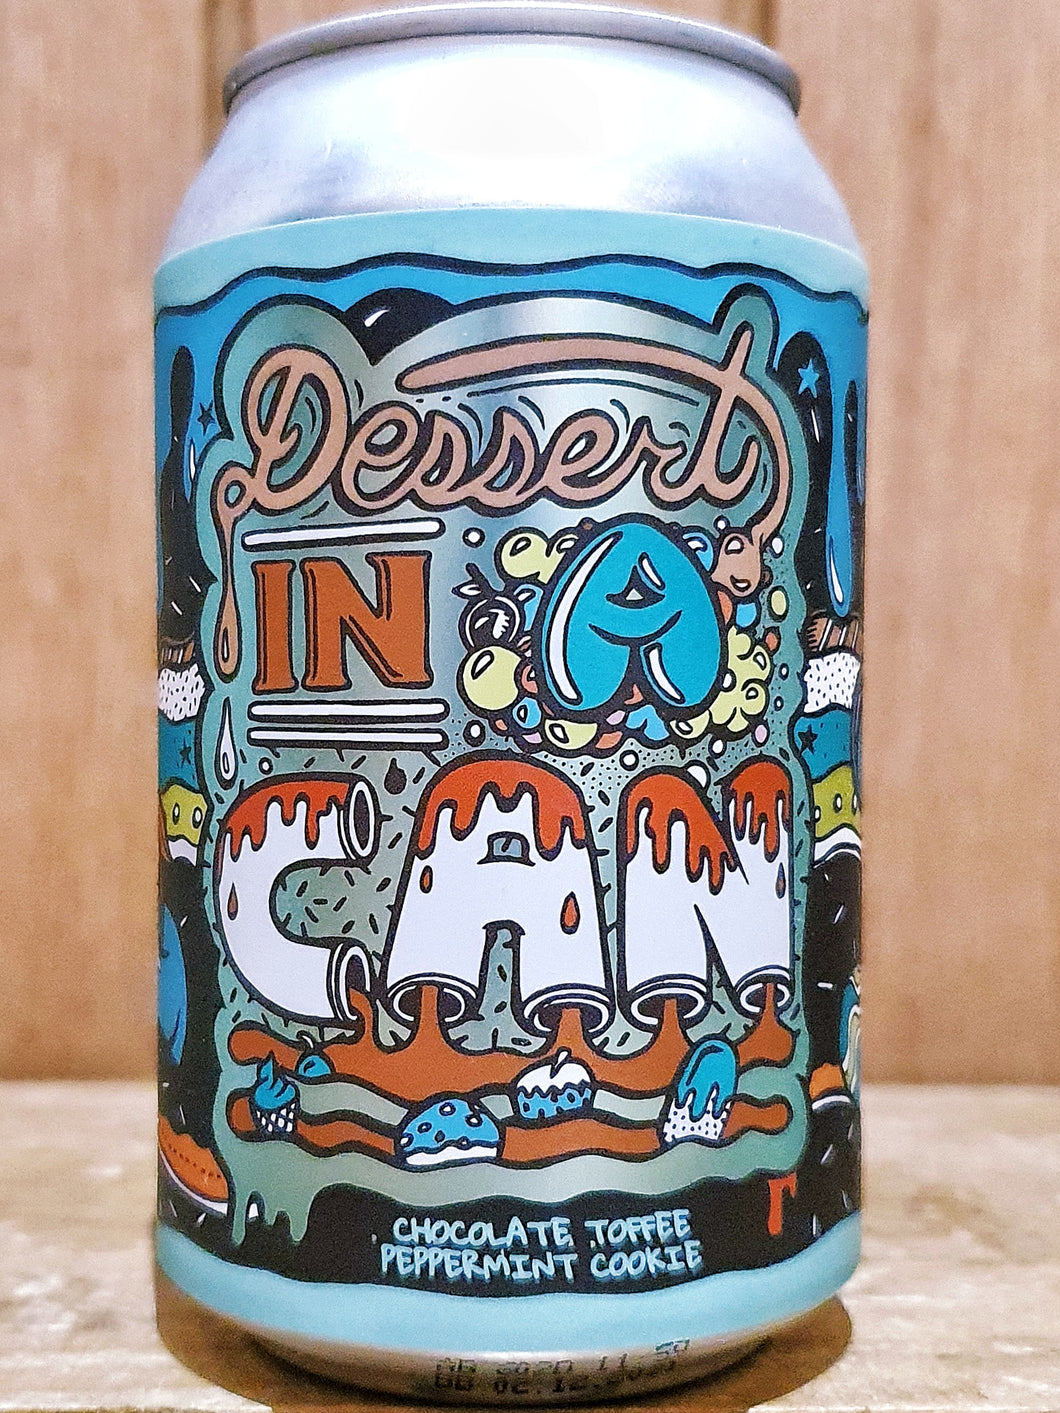 Amundsen - Dessert in a Can 'Chocolate Toffee Peppermint Cookie'